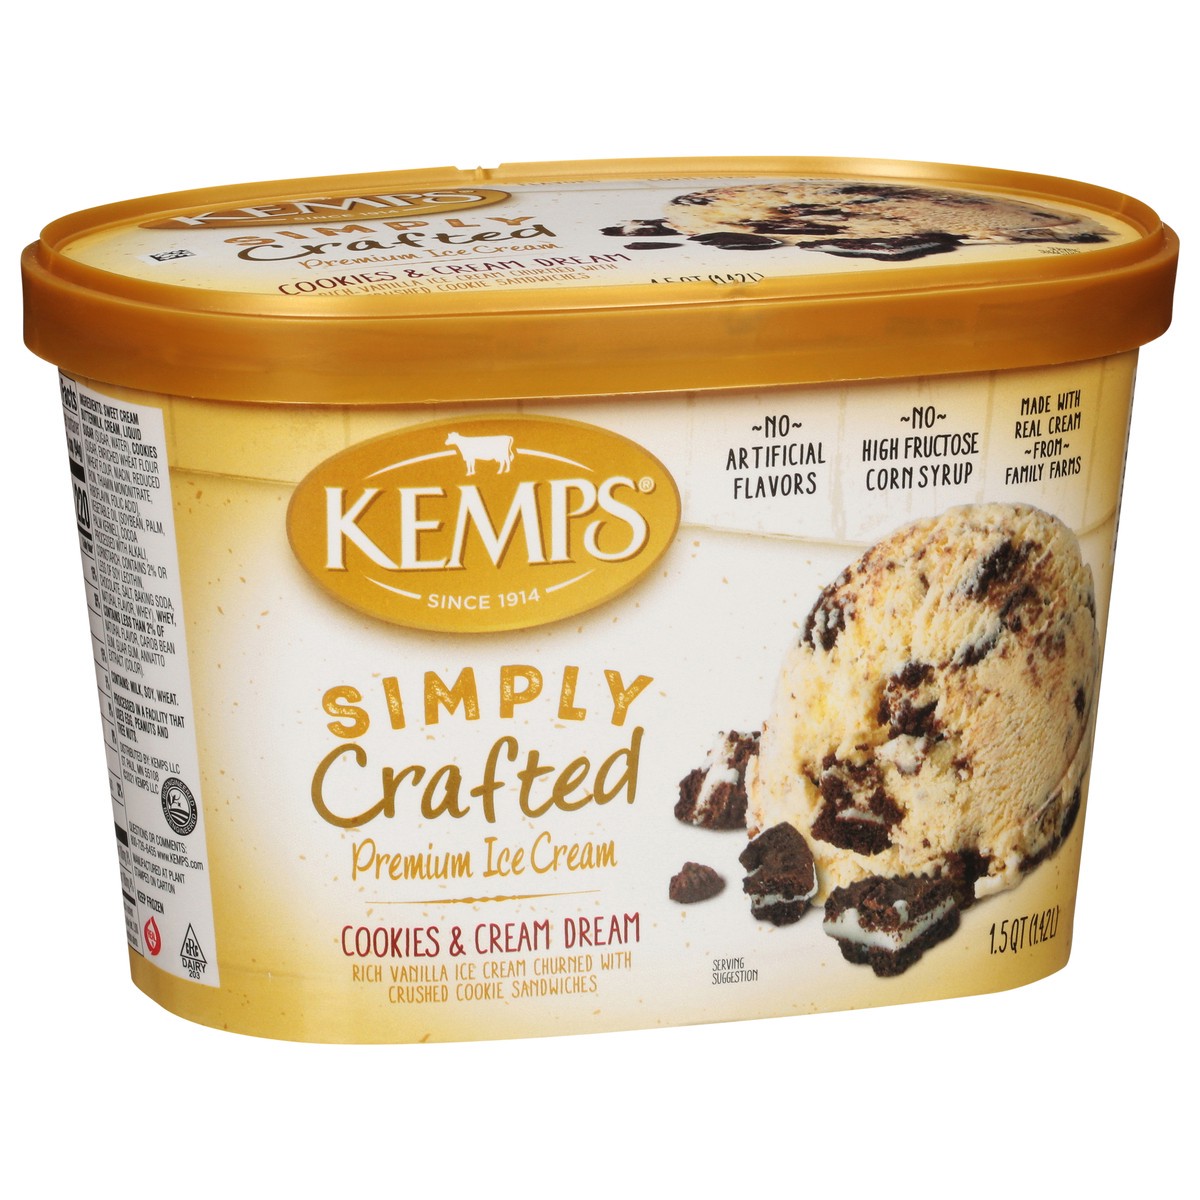 slide 2 of 9, Kemps Cookies & Creme Simply Crafted Ice Cream, 1.5 qt